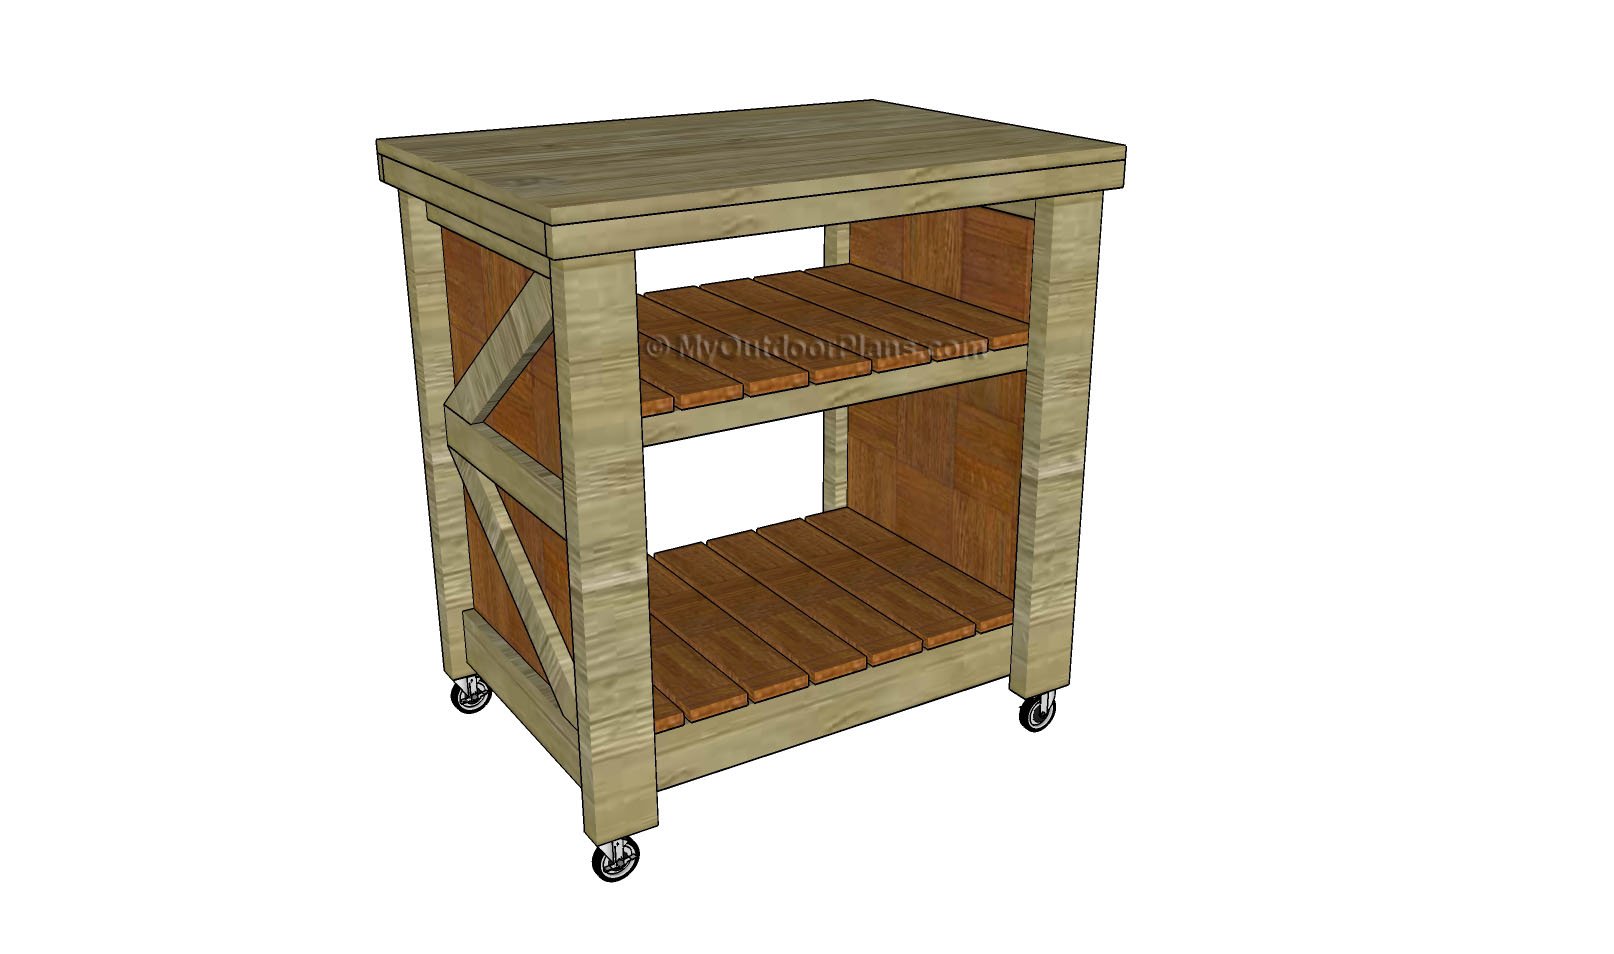 Small Kitchen Island Plans | Free Outdoor Plans - DIY Shed, Wooden 